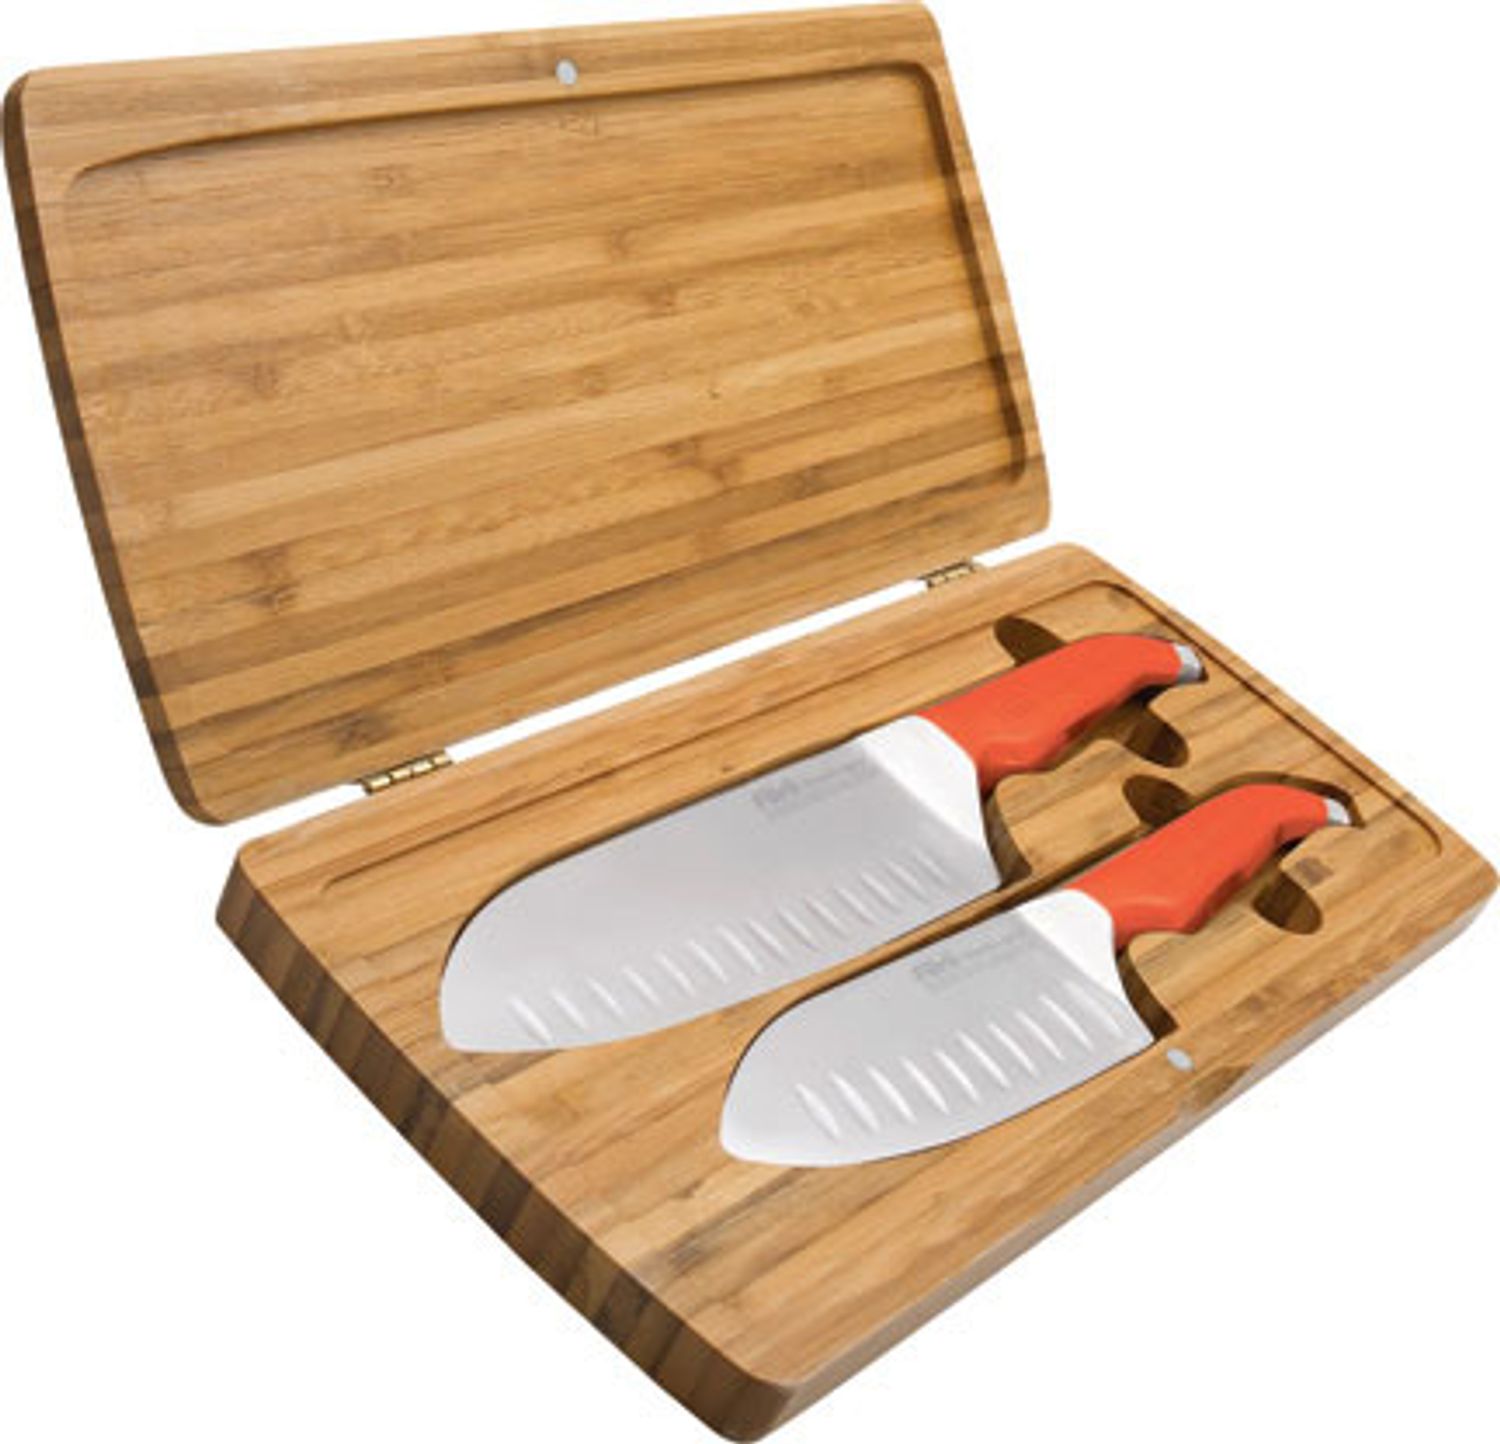 Furi Rachael Ray Coppertail 3-Piece East/West Bamboo Knife Set